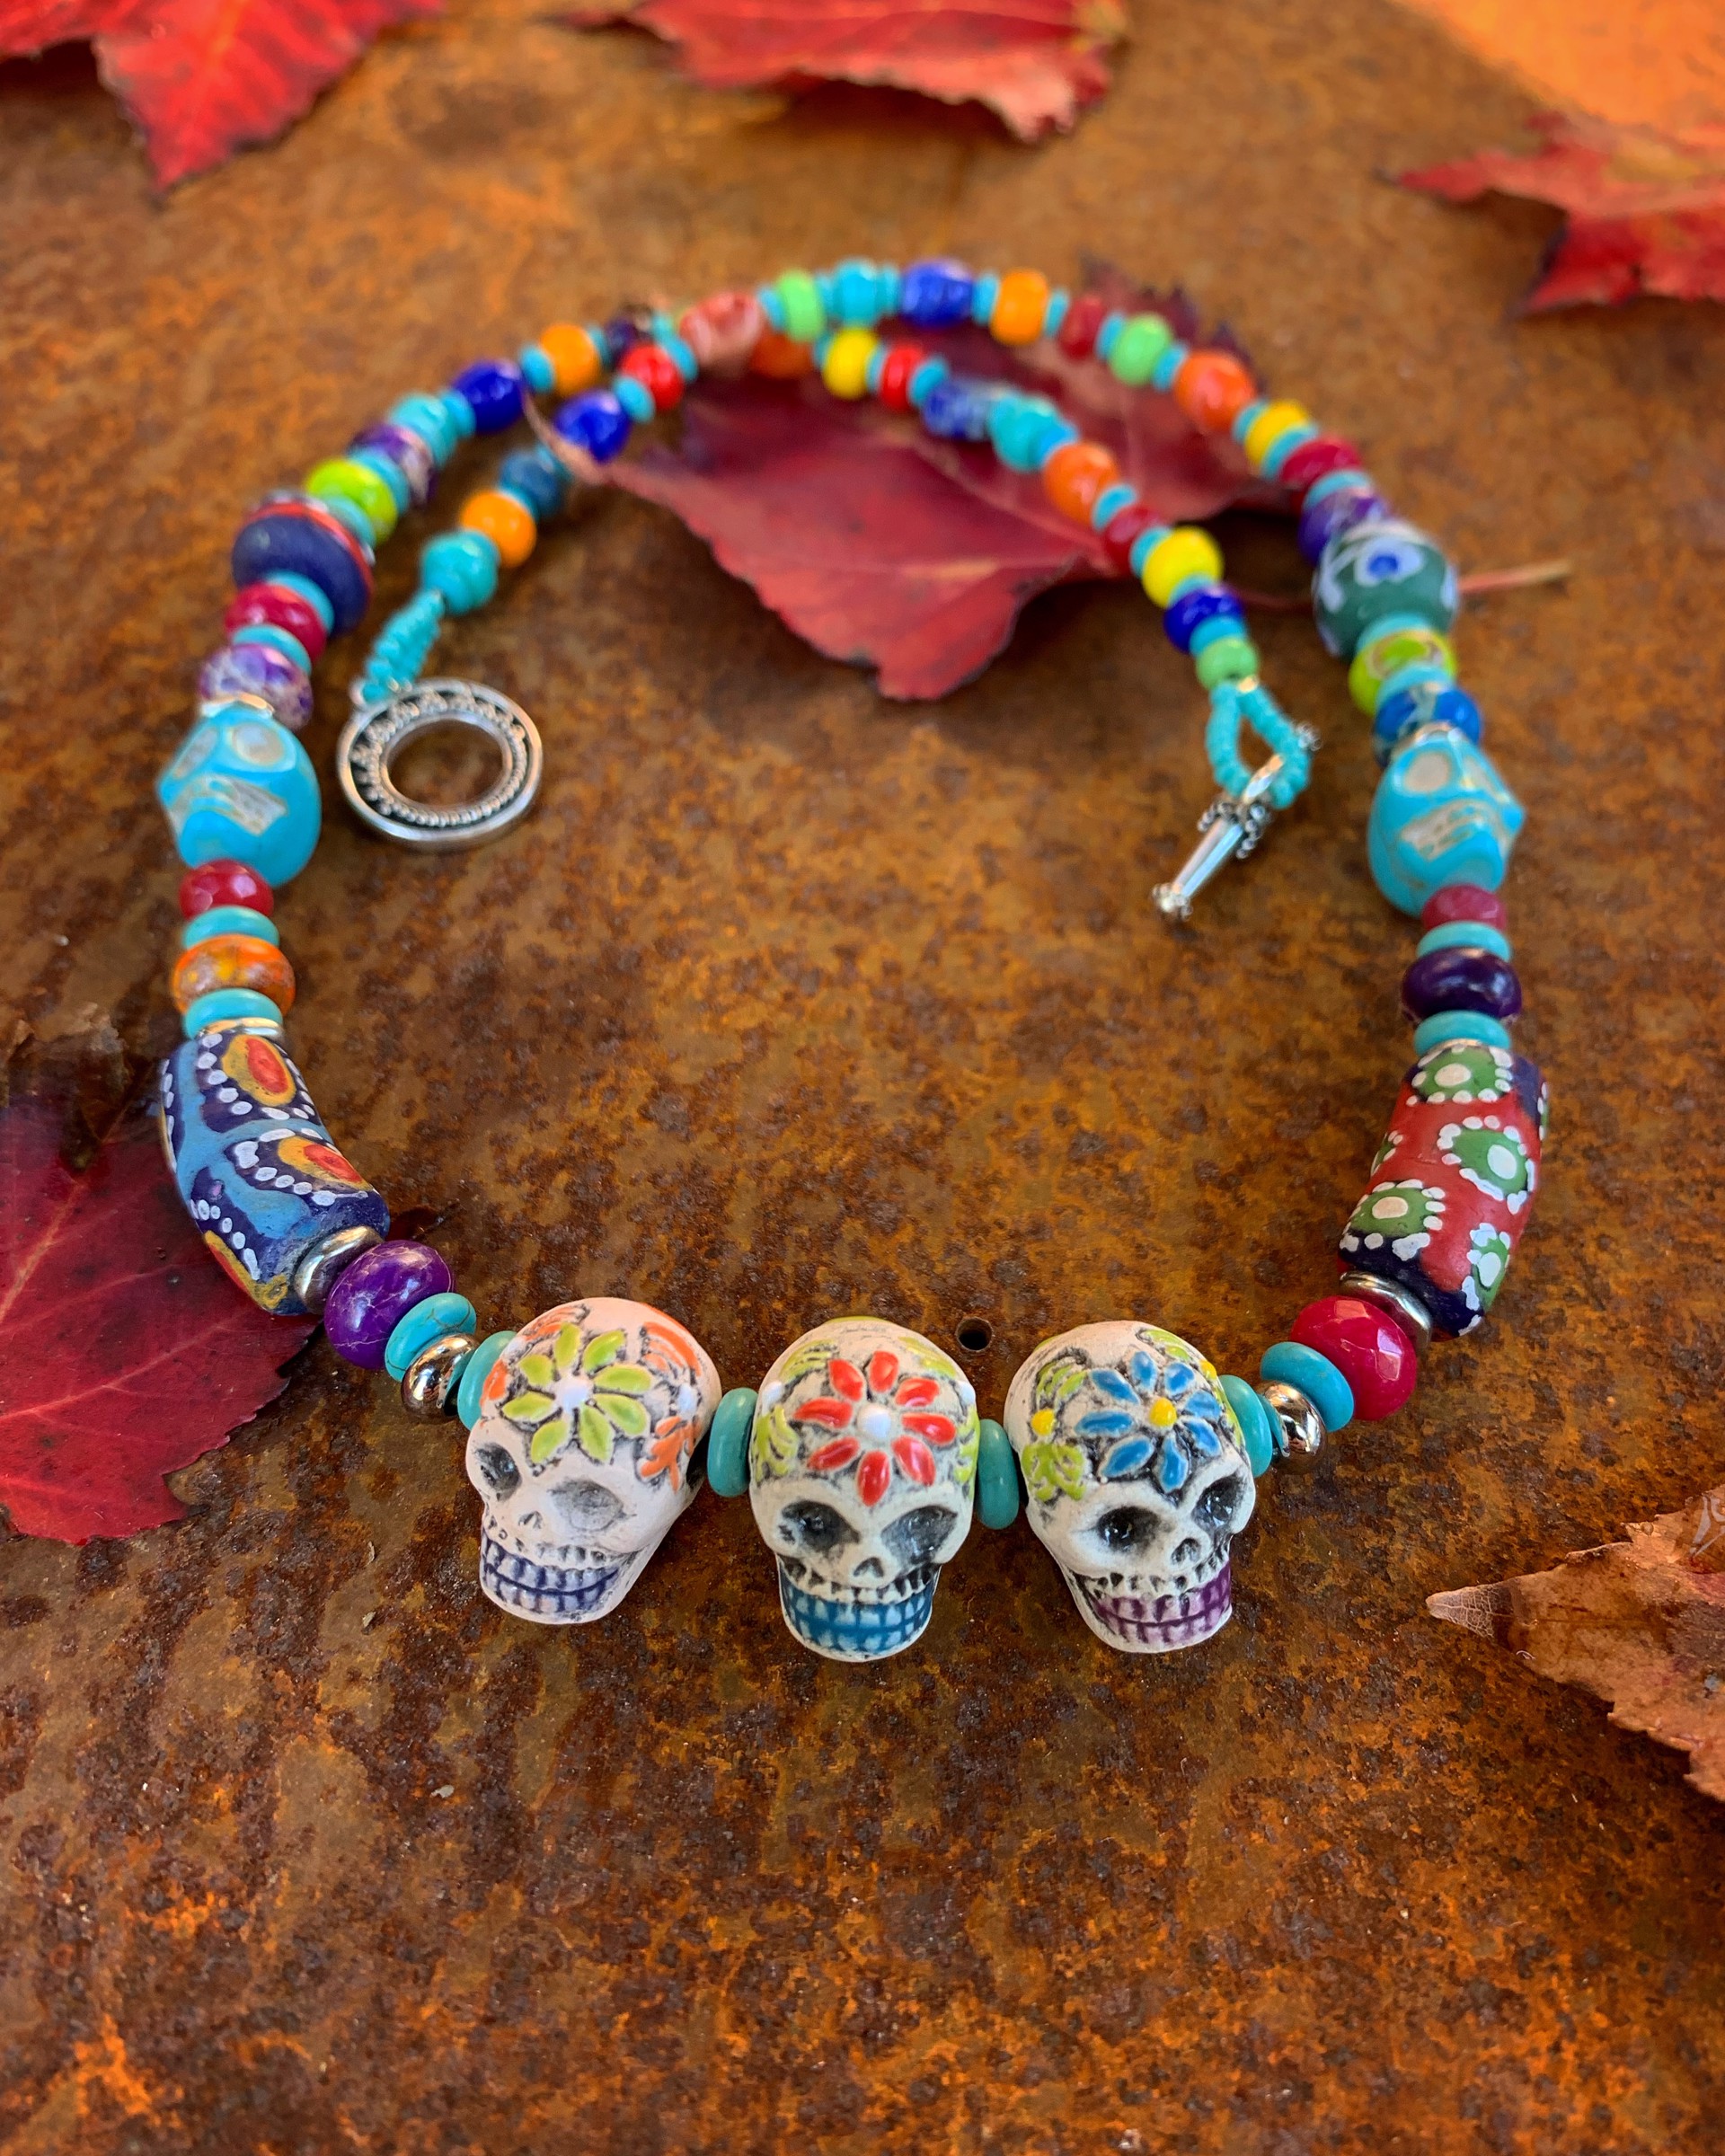 K677 Peruvian Sugar Skull Necklace by Kelly Ormsby